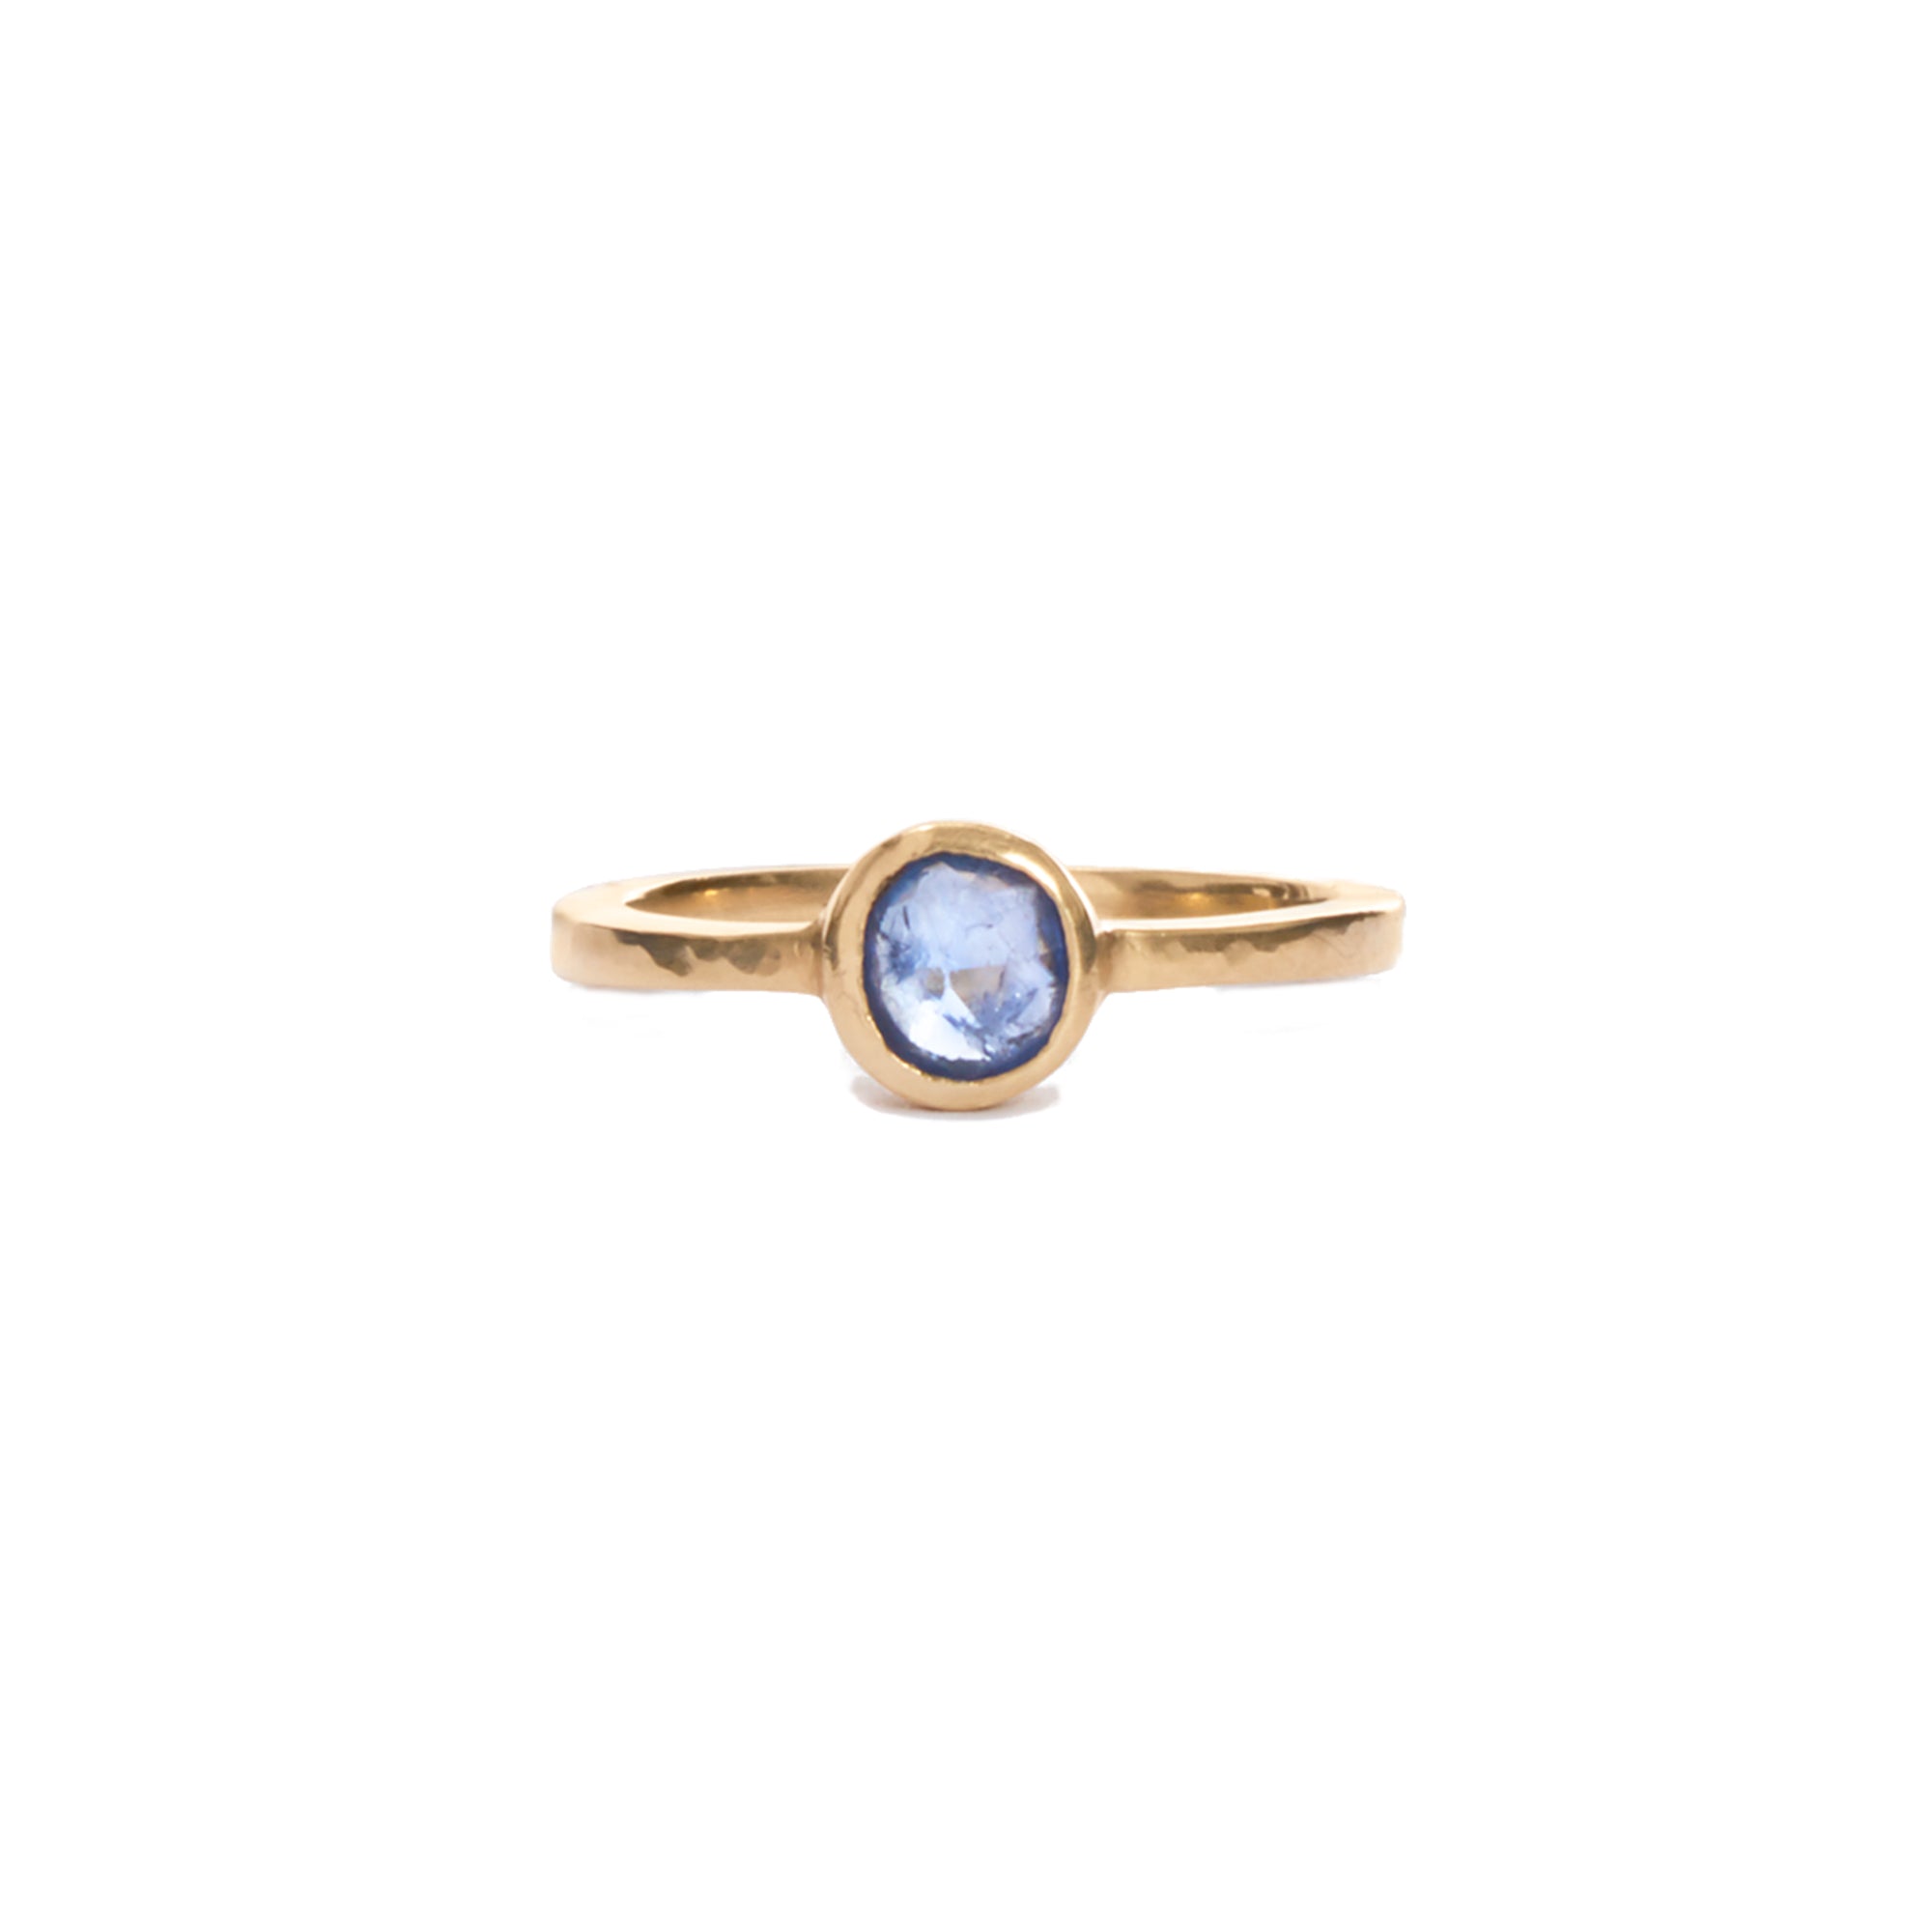 Our blue sapphire solitaire is a modern take on the classic favorite, featuring a round blue sapphire bezel set in 14k gold